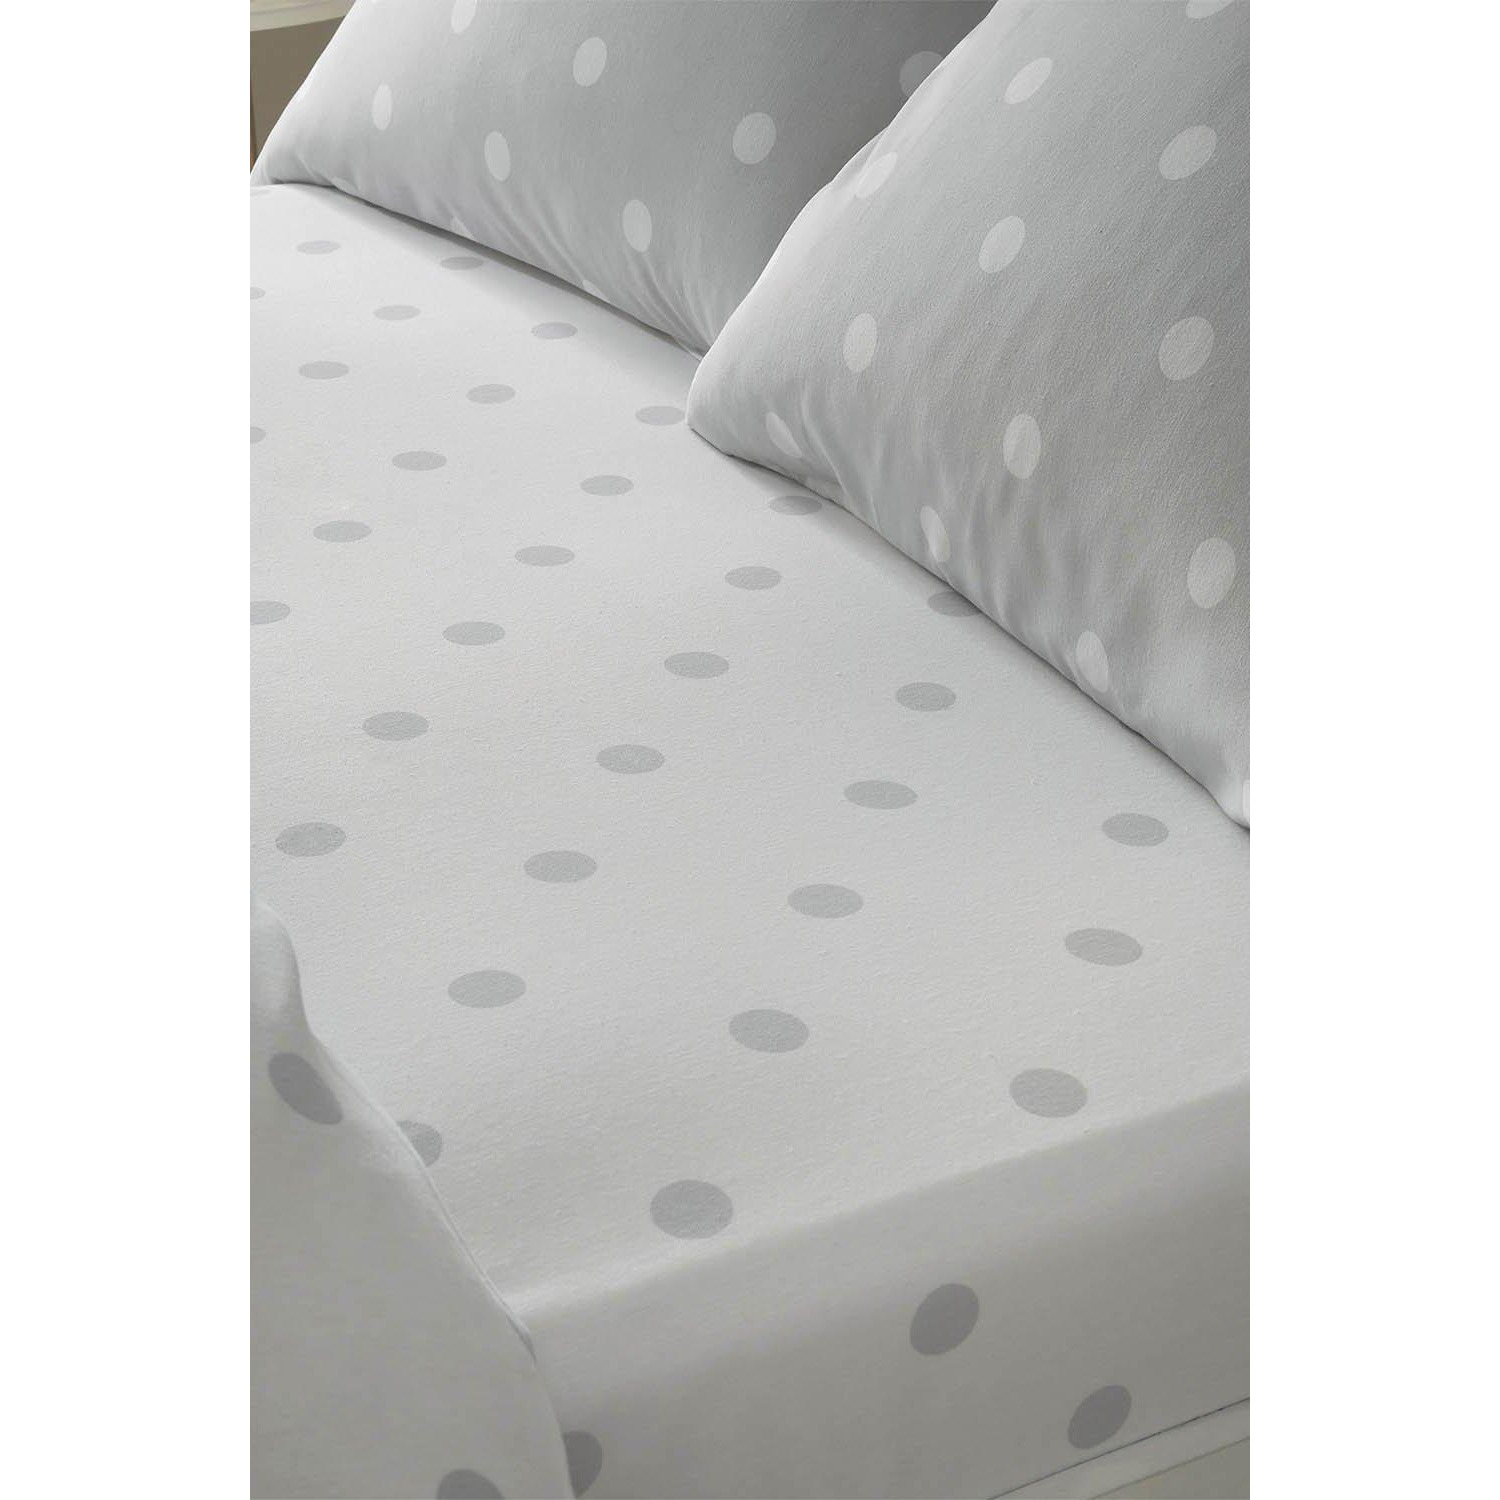 'Brushed Spot' Fitted Sheet - image 1